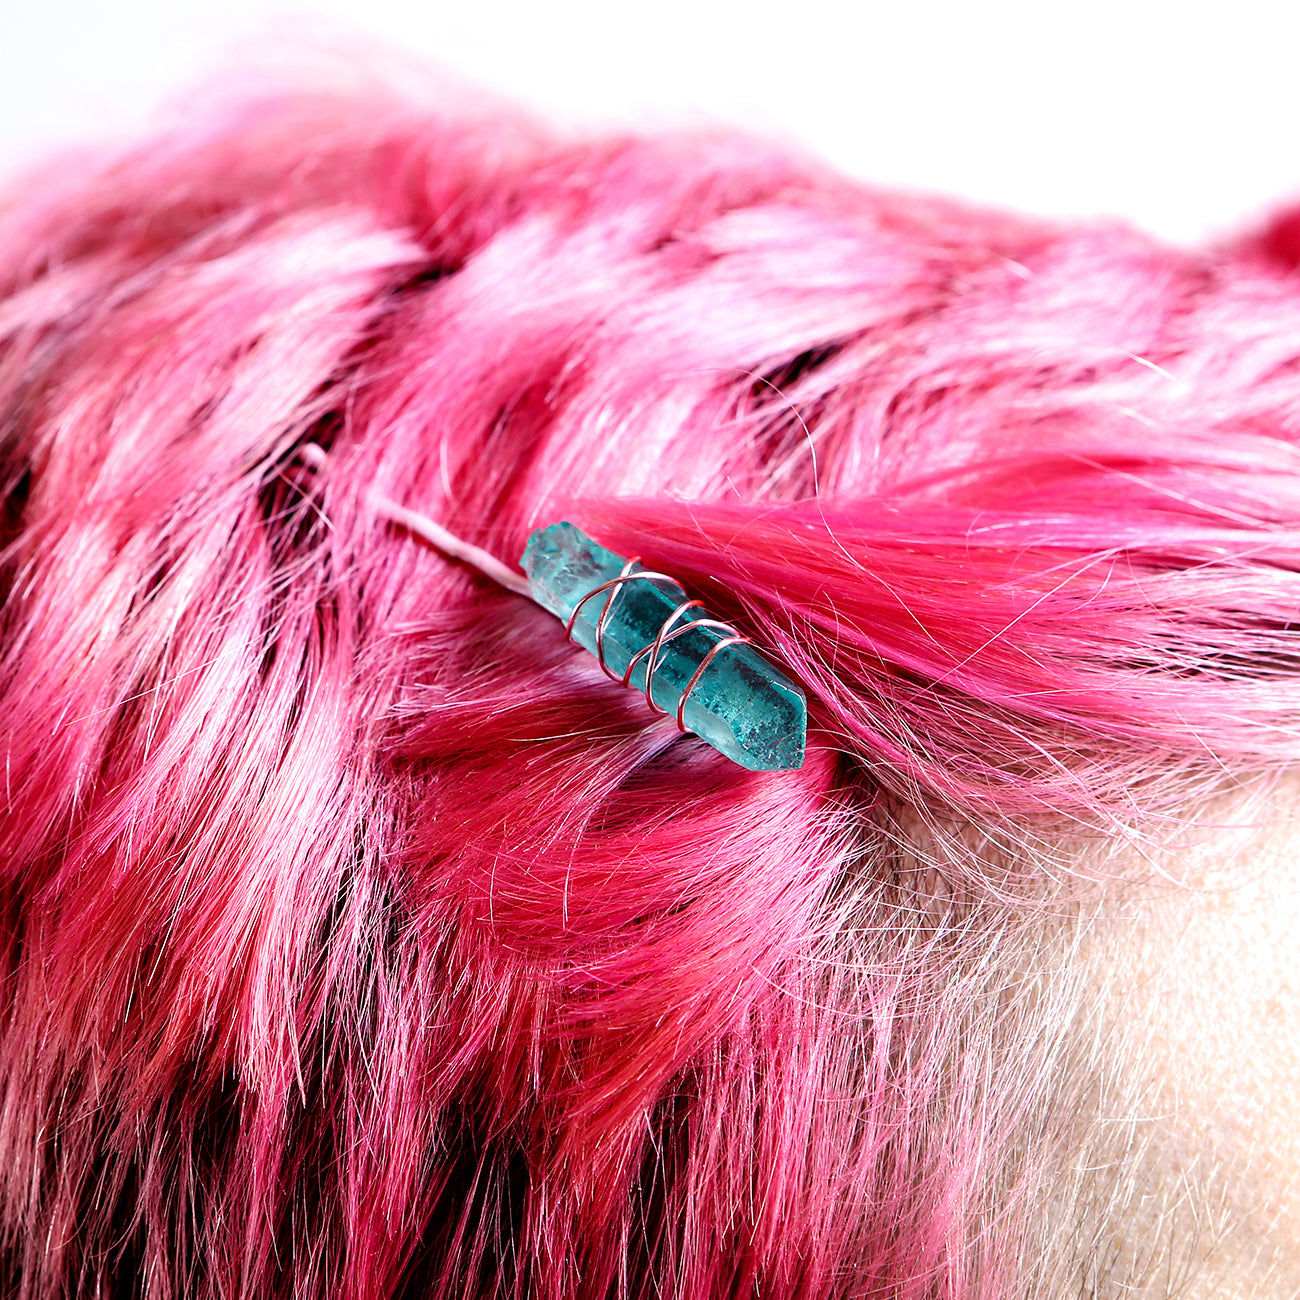 Light blue crystal on pink pin on model with pink hair.